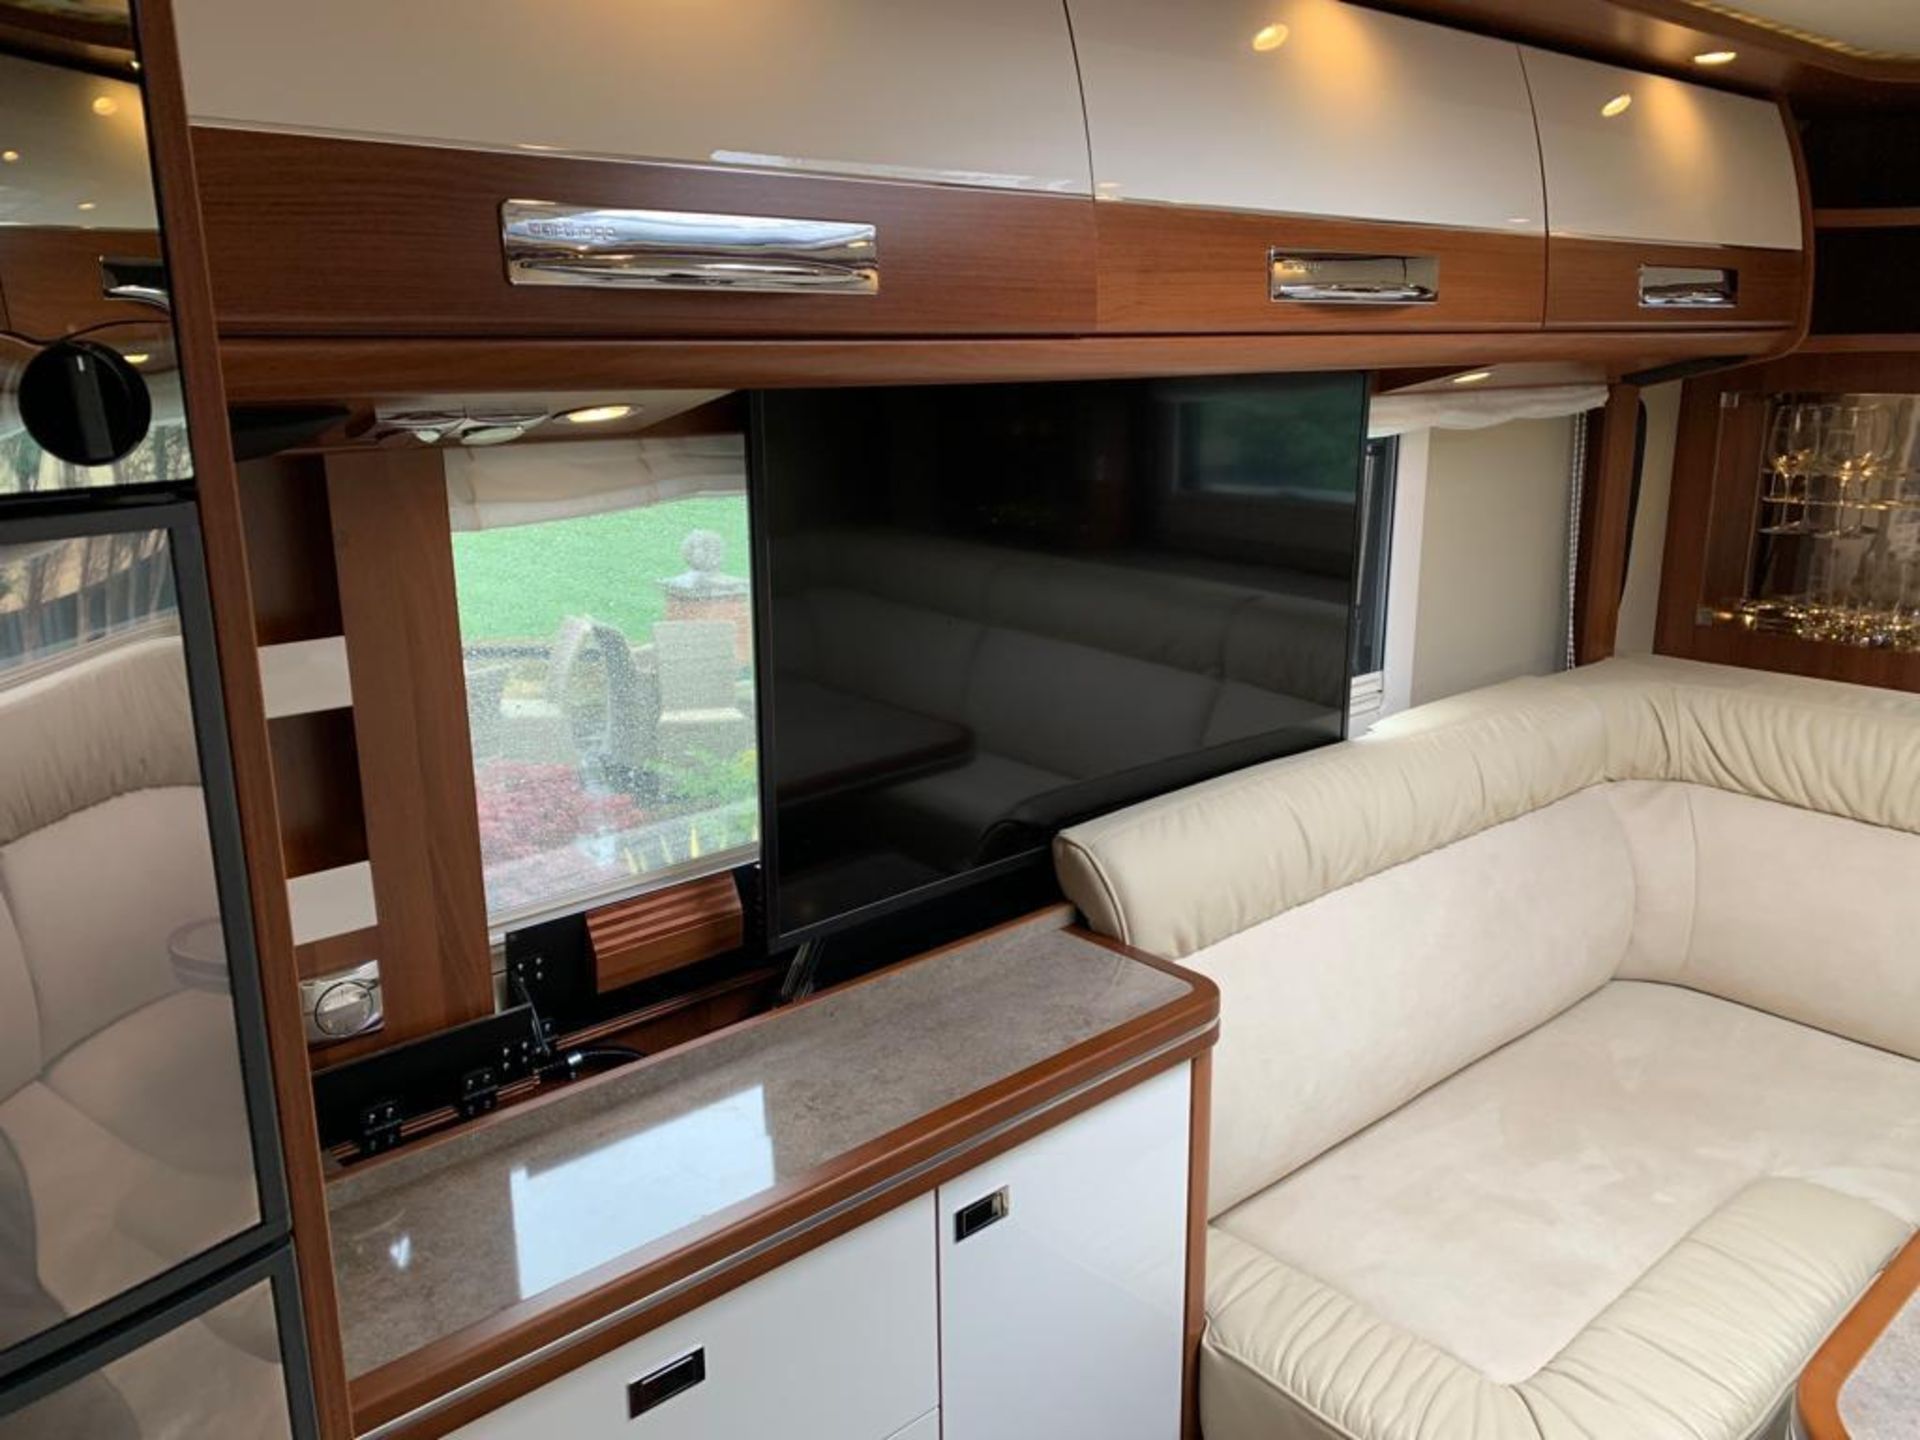 2020 CARTHAGO LINER-FOR-TWO 53L MOTORHOME 11 mths WARRANTY 4529 MILES, MINT CONDITION NO VAT - Image 21 of 38